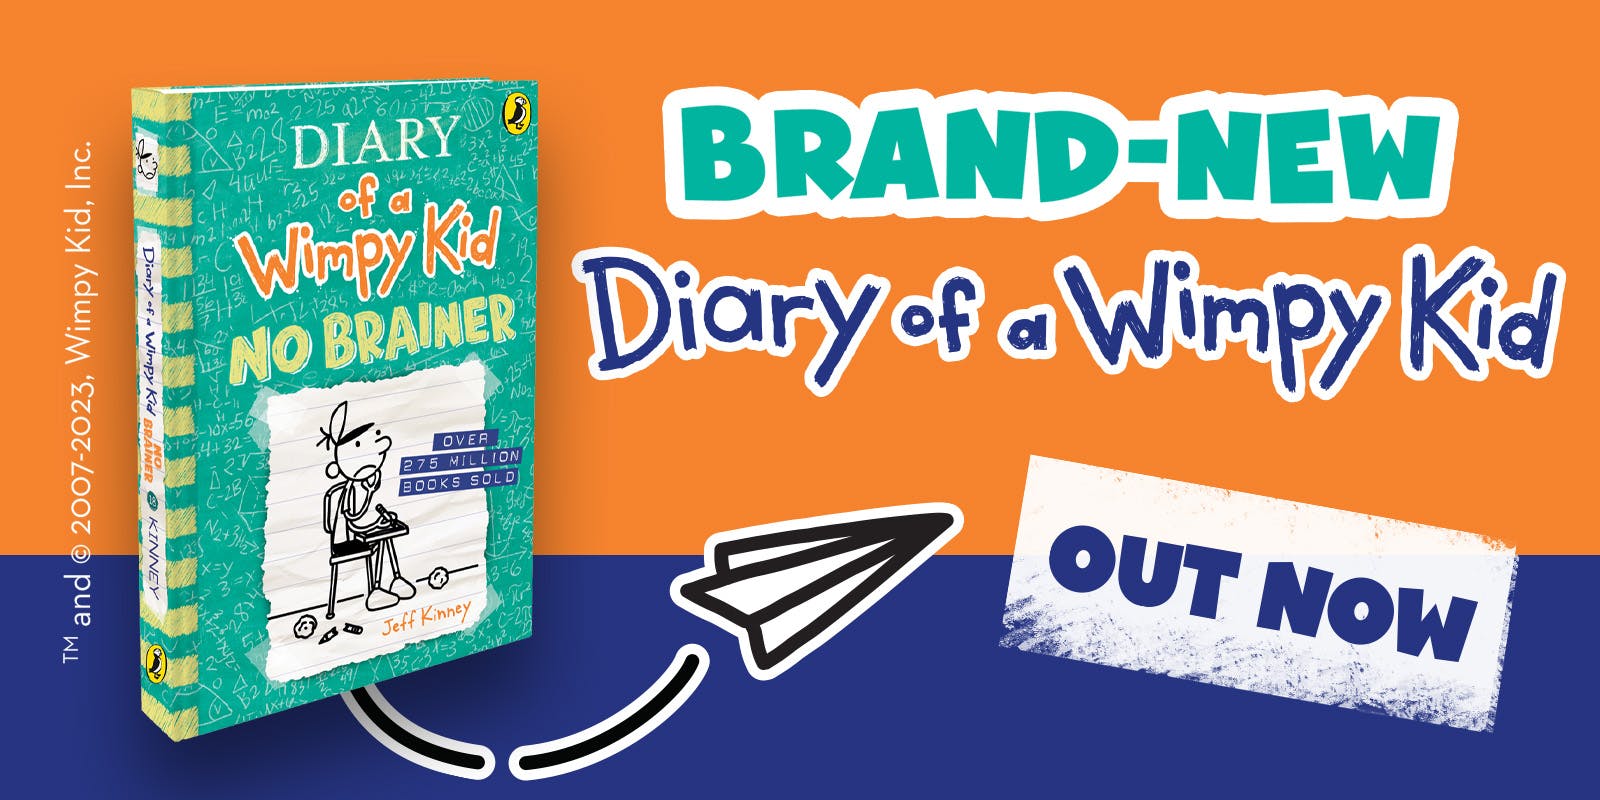 Diary of a Wimpy Kid: No Brainer (Book 18) by Jeff Kinney